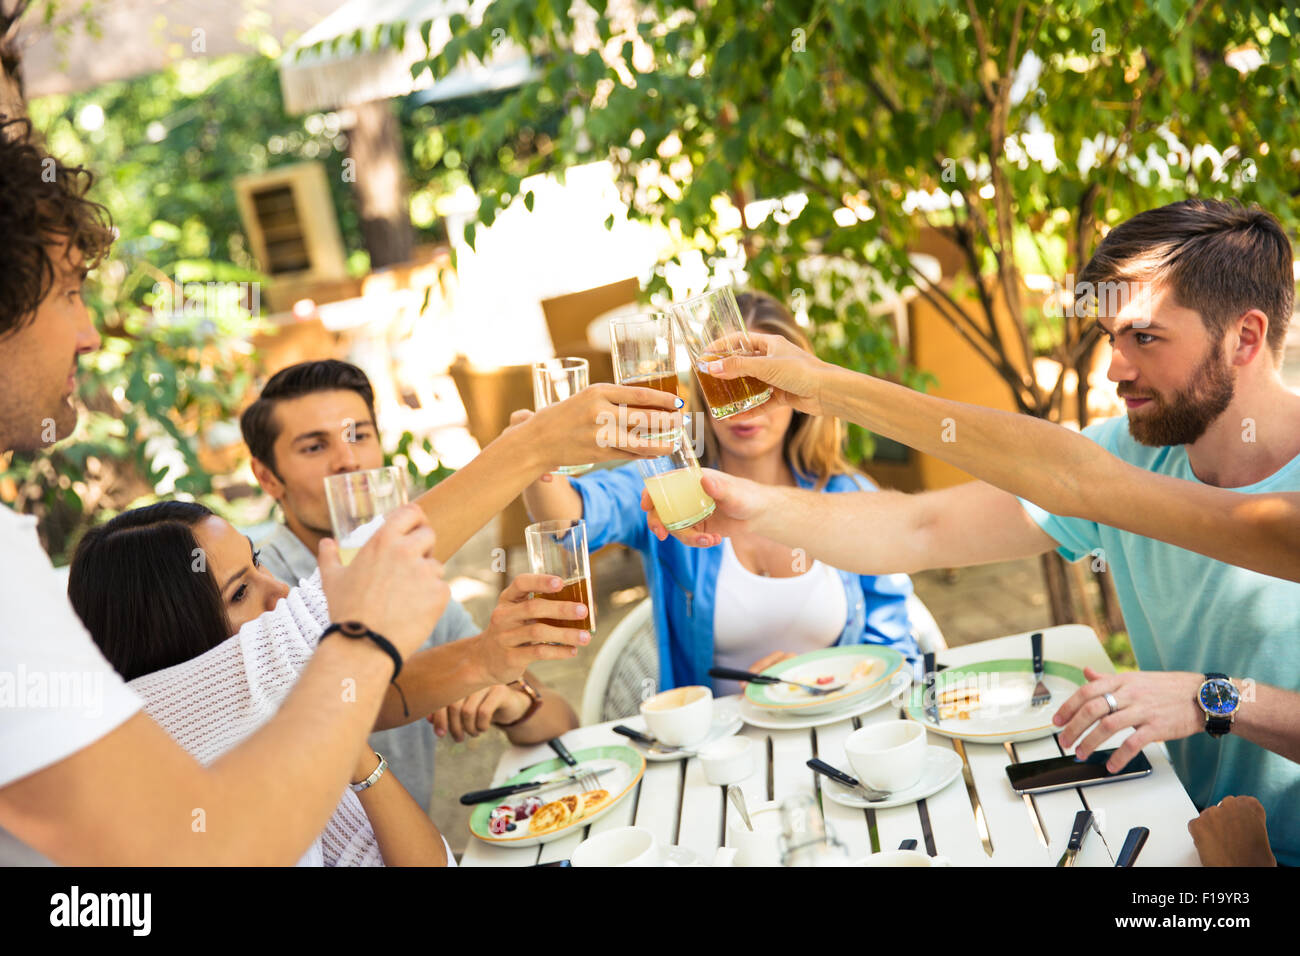 Group of a friends making toast around table at dinner party in outdoor restaurant Stock Photo